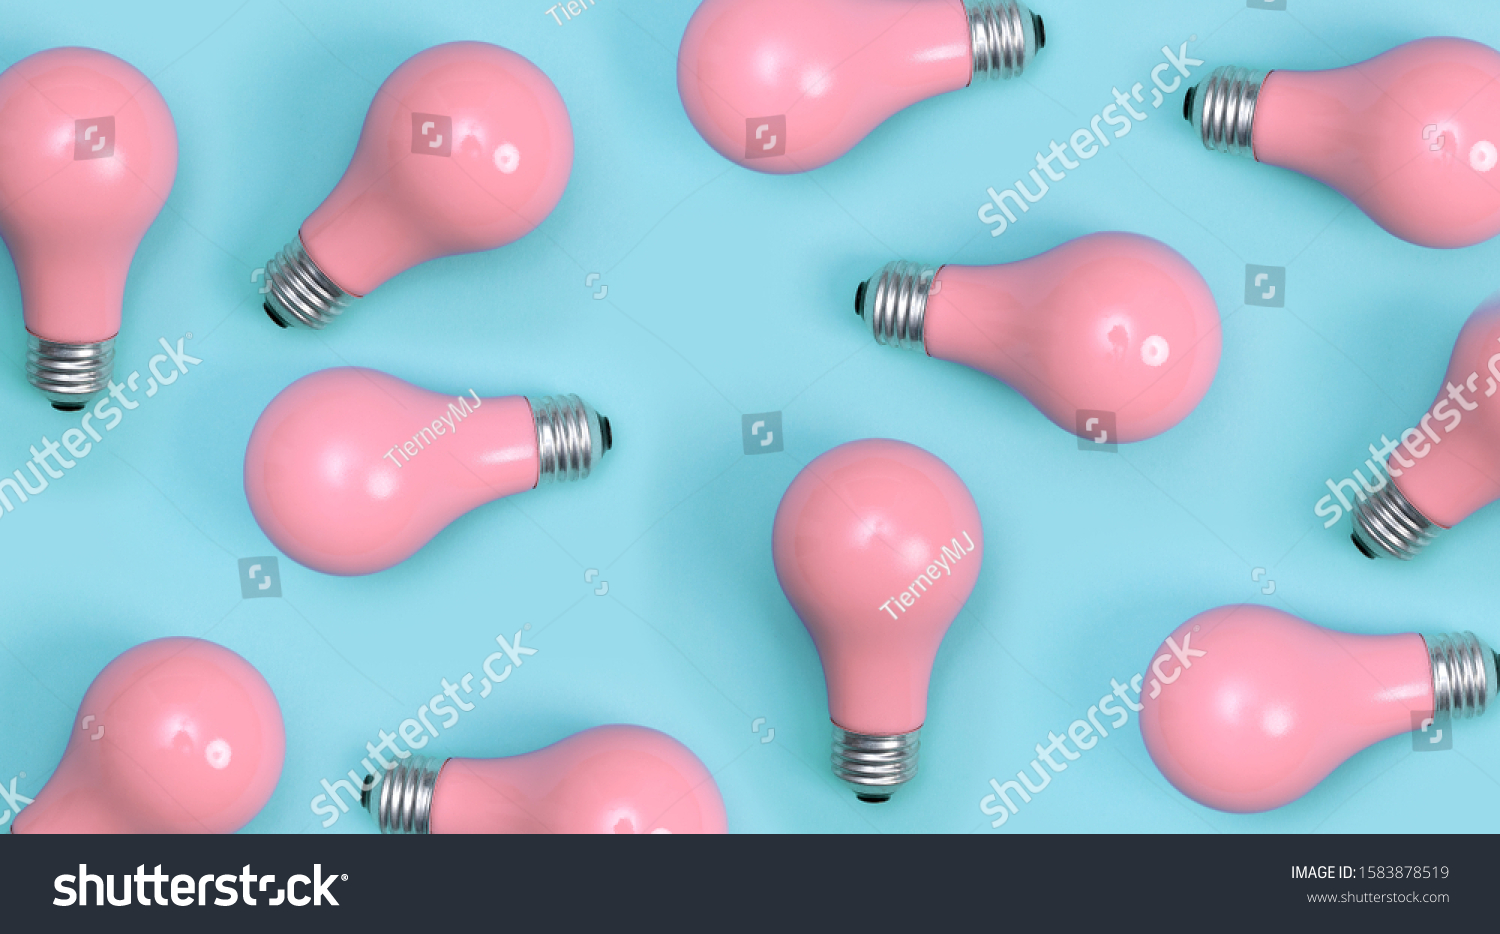 Pink painted lightbulbs on a blue background #1583878519